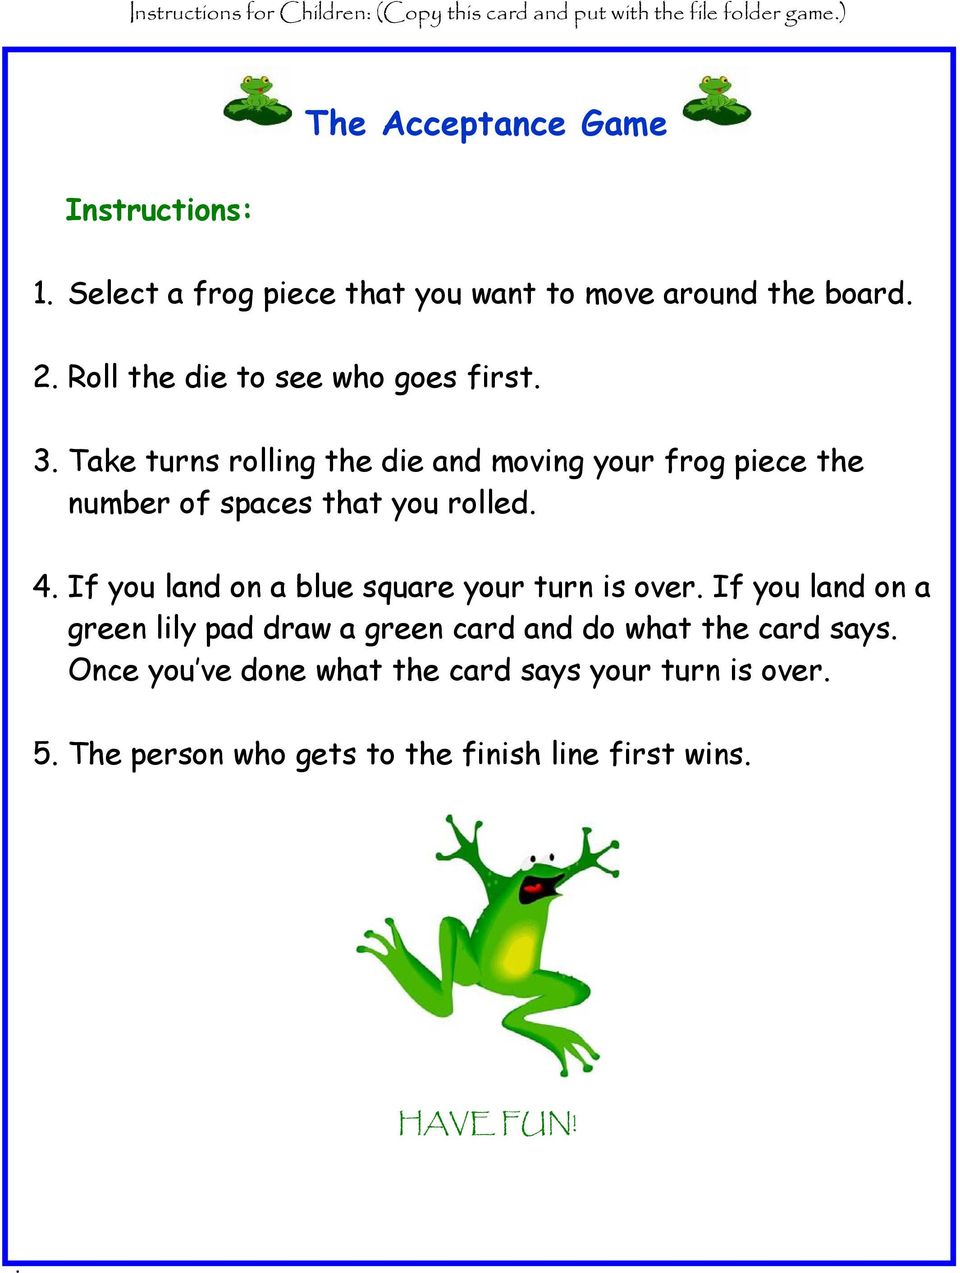 Take turns rolling the die and moving your frog piece the number of spaces that you rolled. 4.